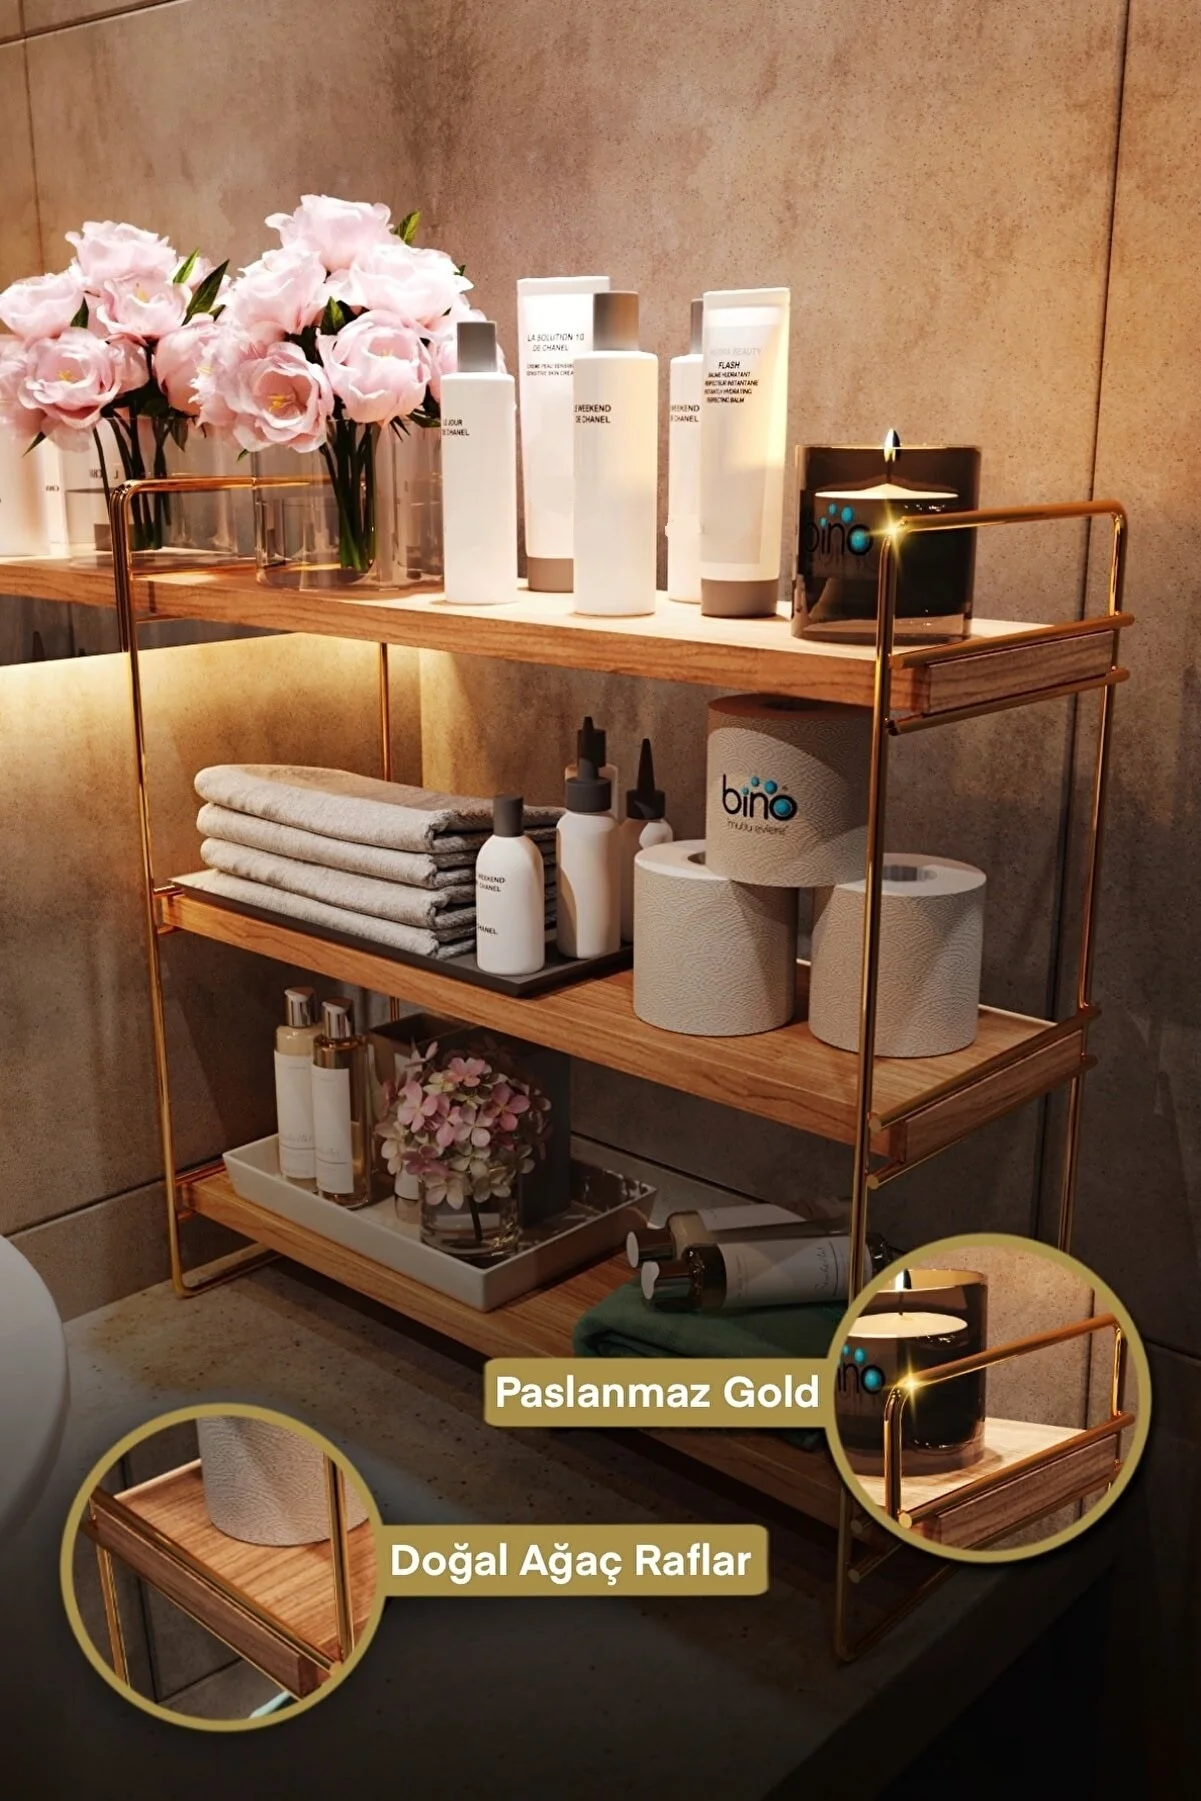 Bino Table Top Organizer Rack Kitchen Bathroom Bookshelf Solid Wood Product Stainless Coating Gold Series Home Appliance